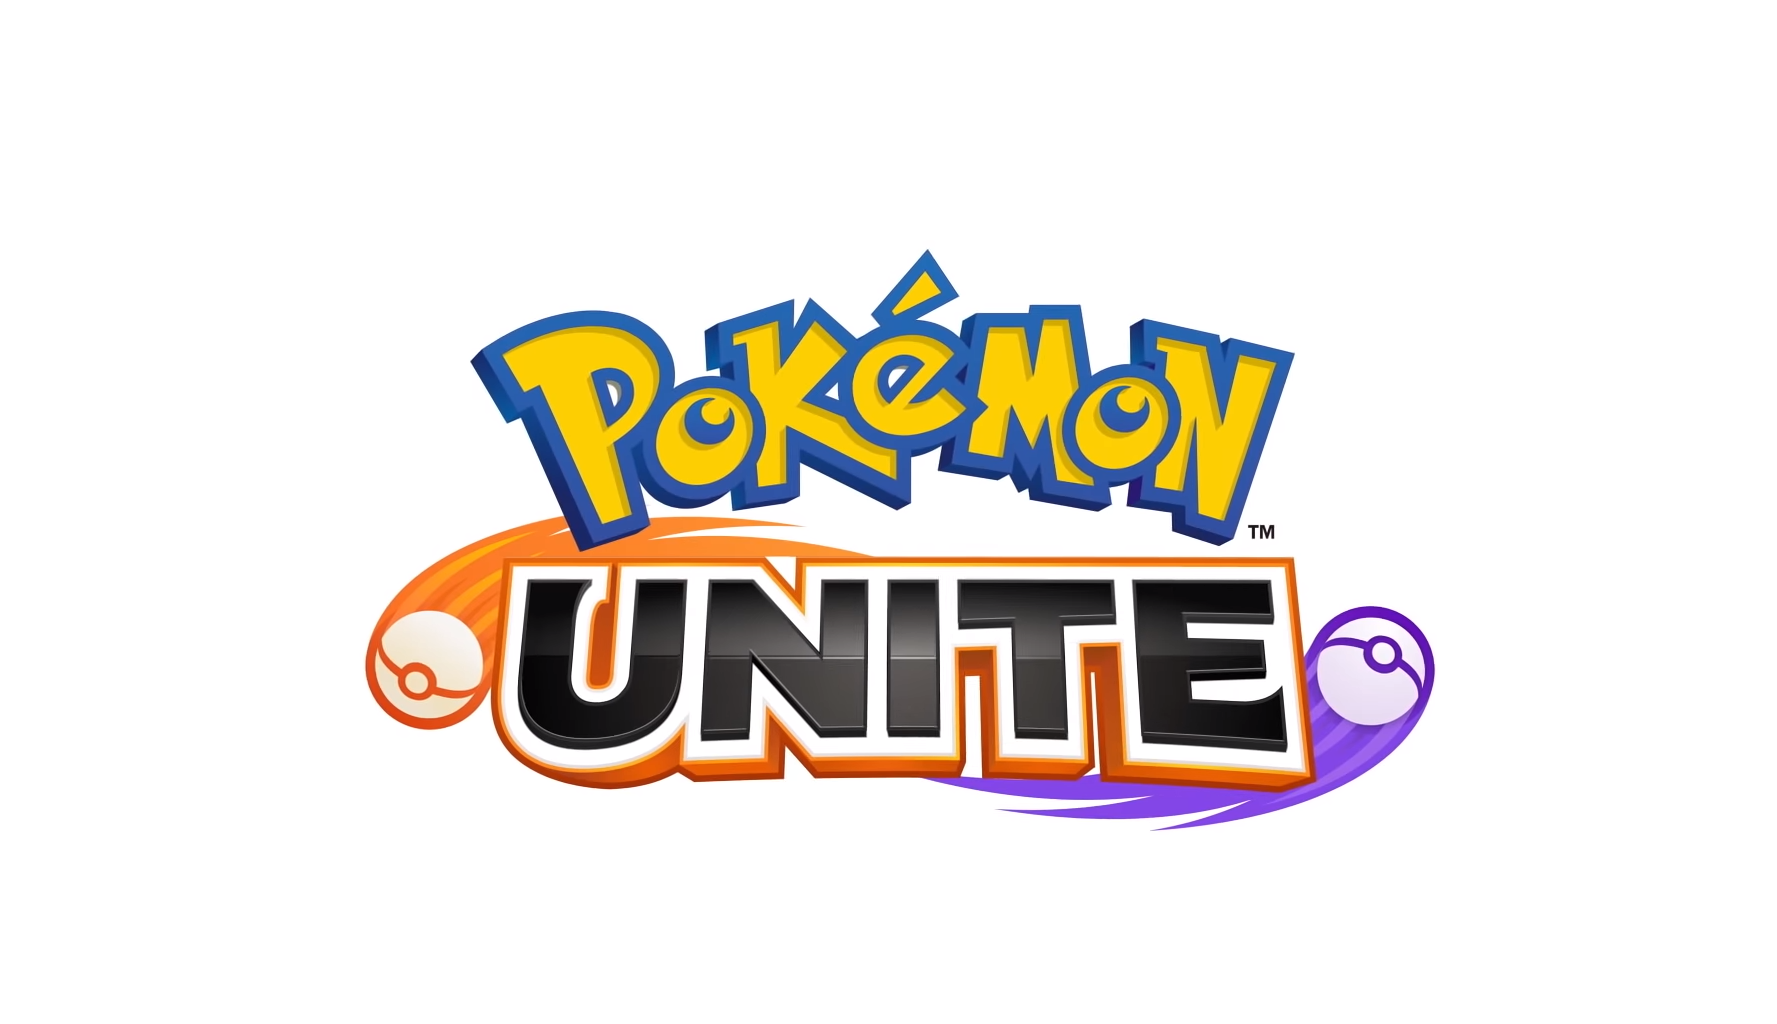 Mobile Pokémon Unite has been downloaded by over 50 million users